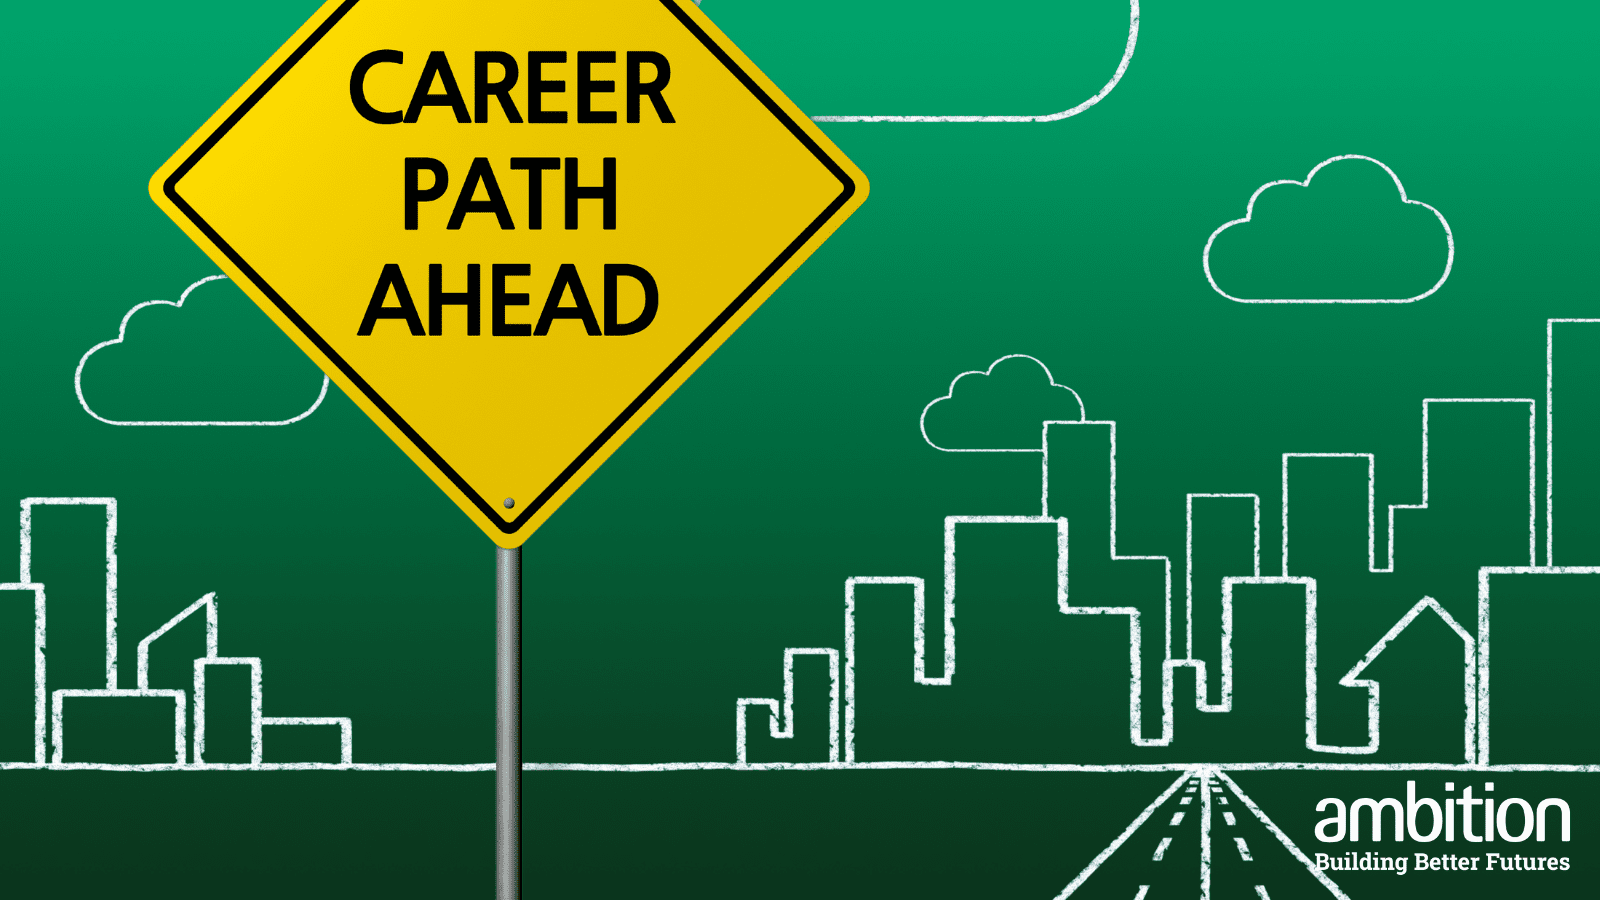 Green background, white outline of city skyline and a yellow sign that says career path ahead 